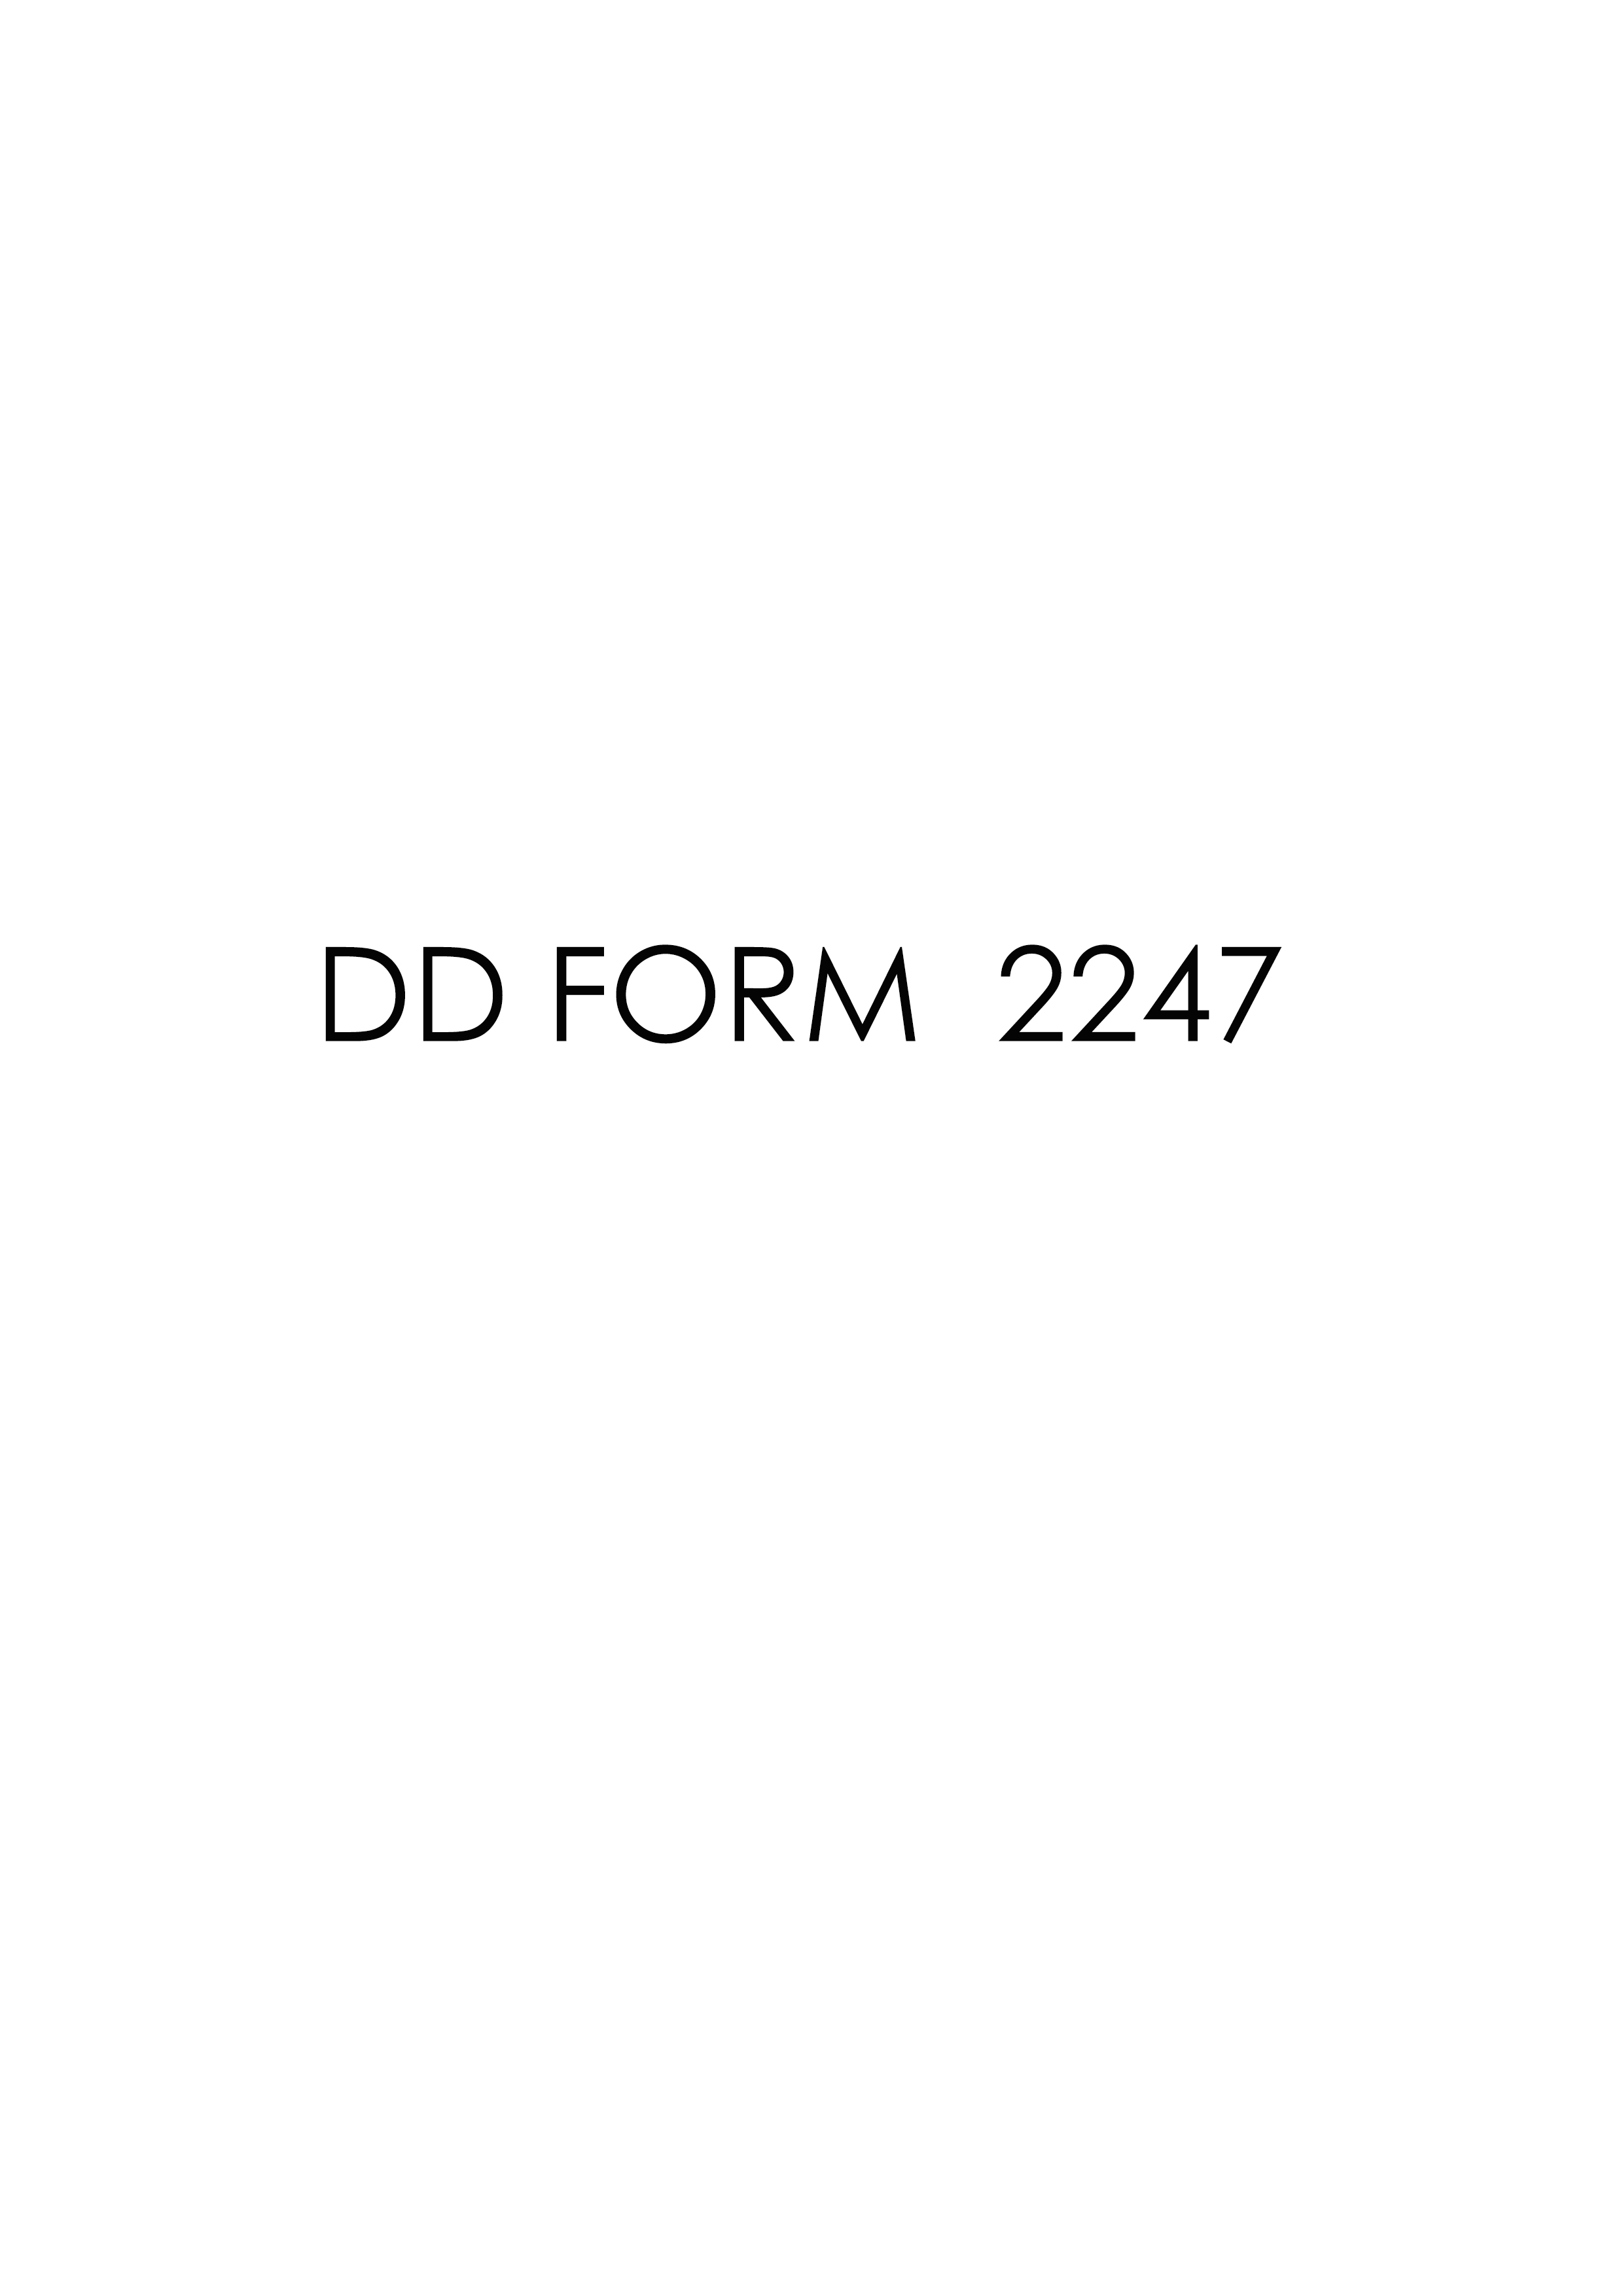 Download Fillable dd Form 2247